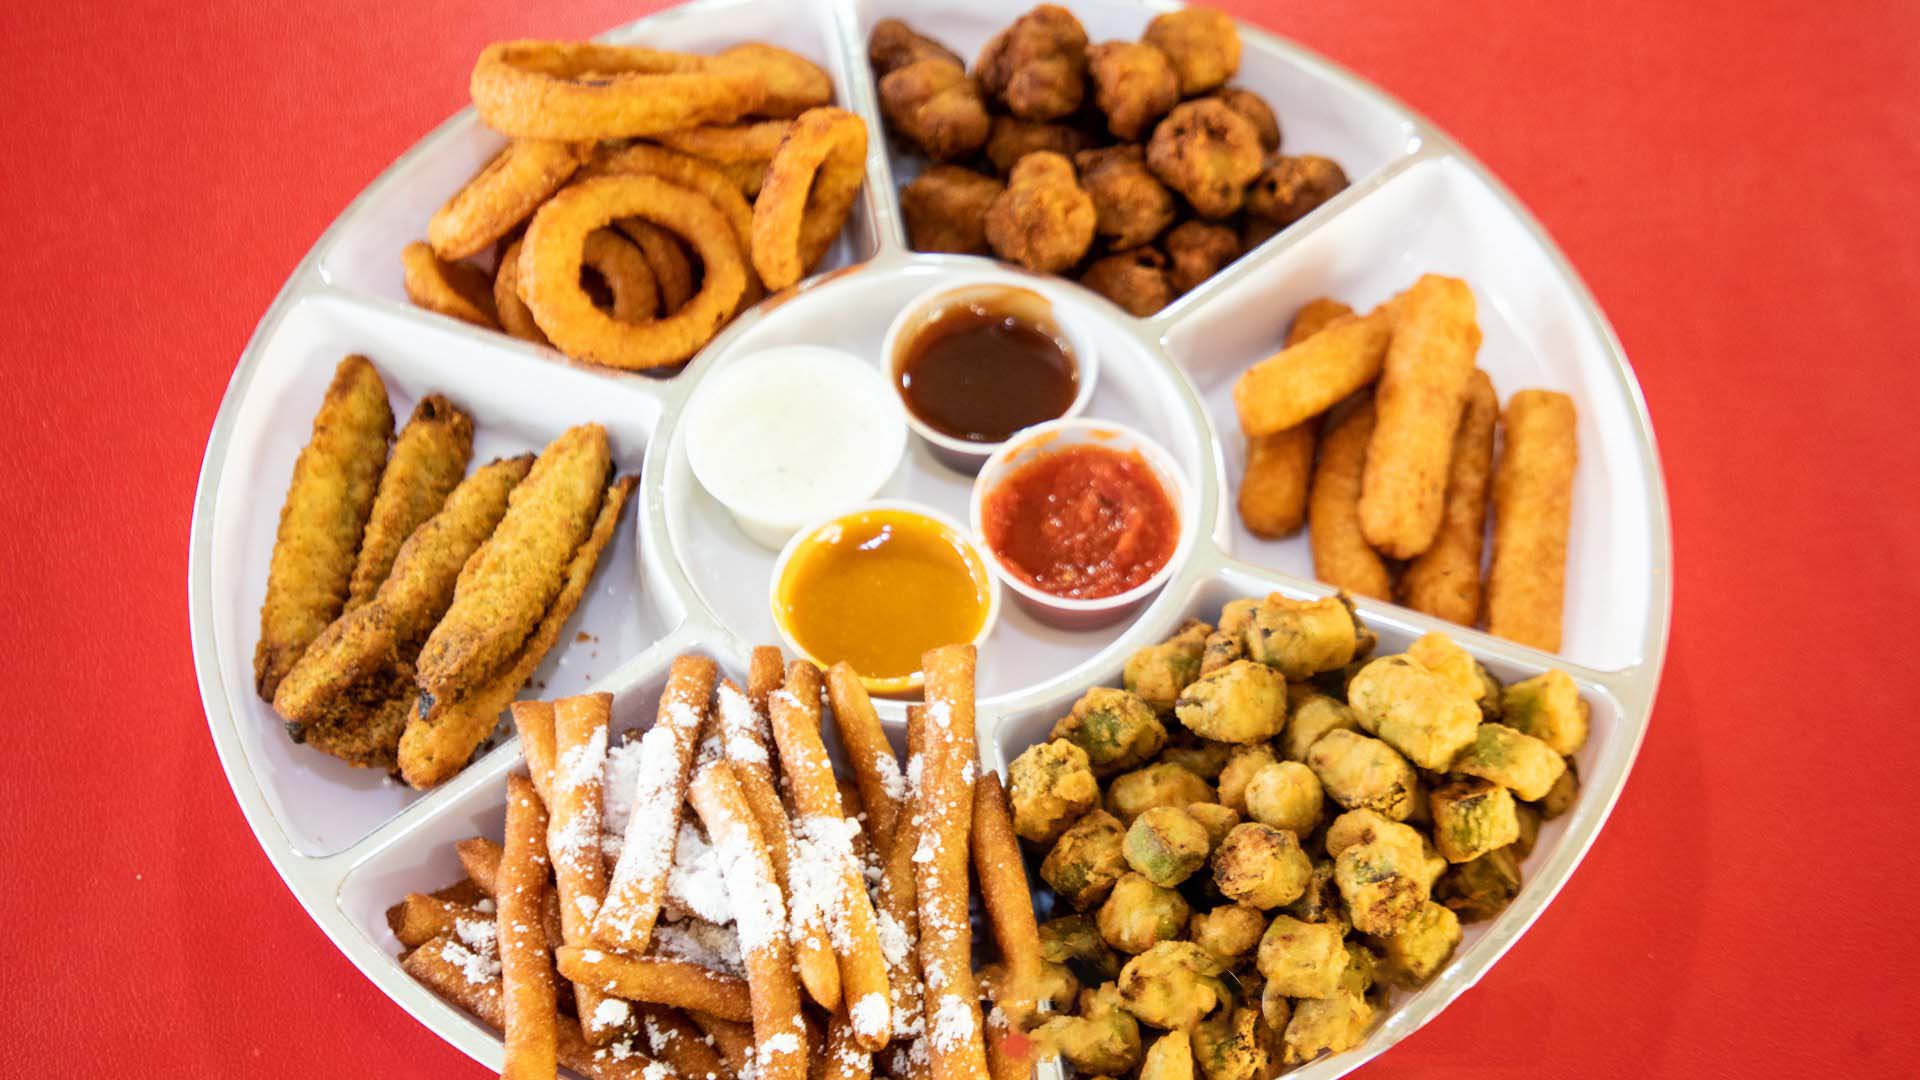 A variety of fried appetizers served with different dipping sauces on a white platter against a red background.